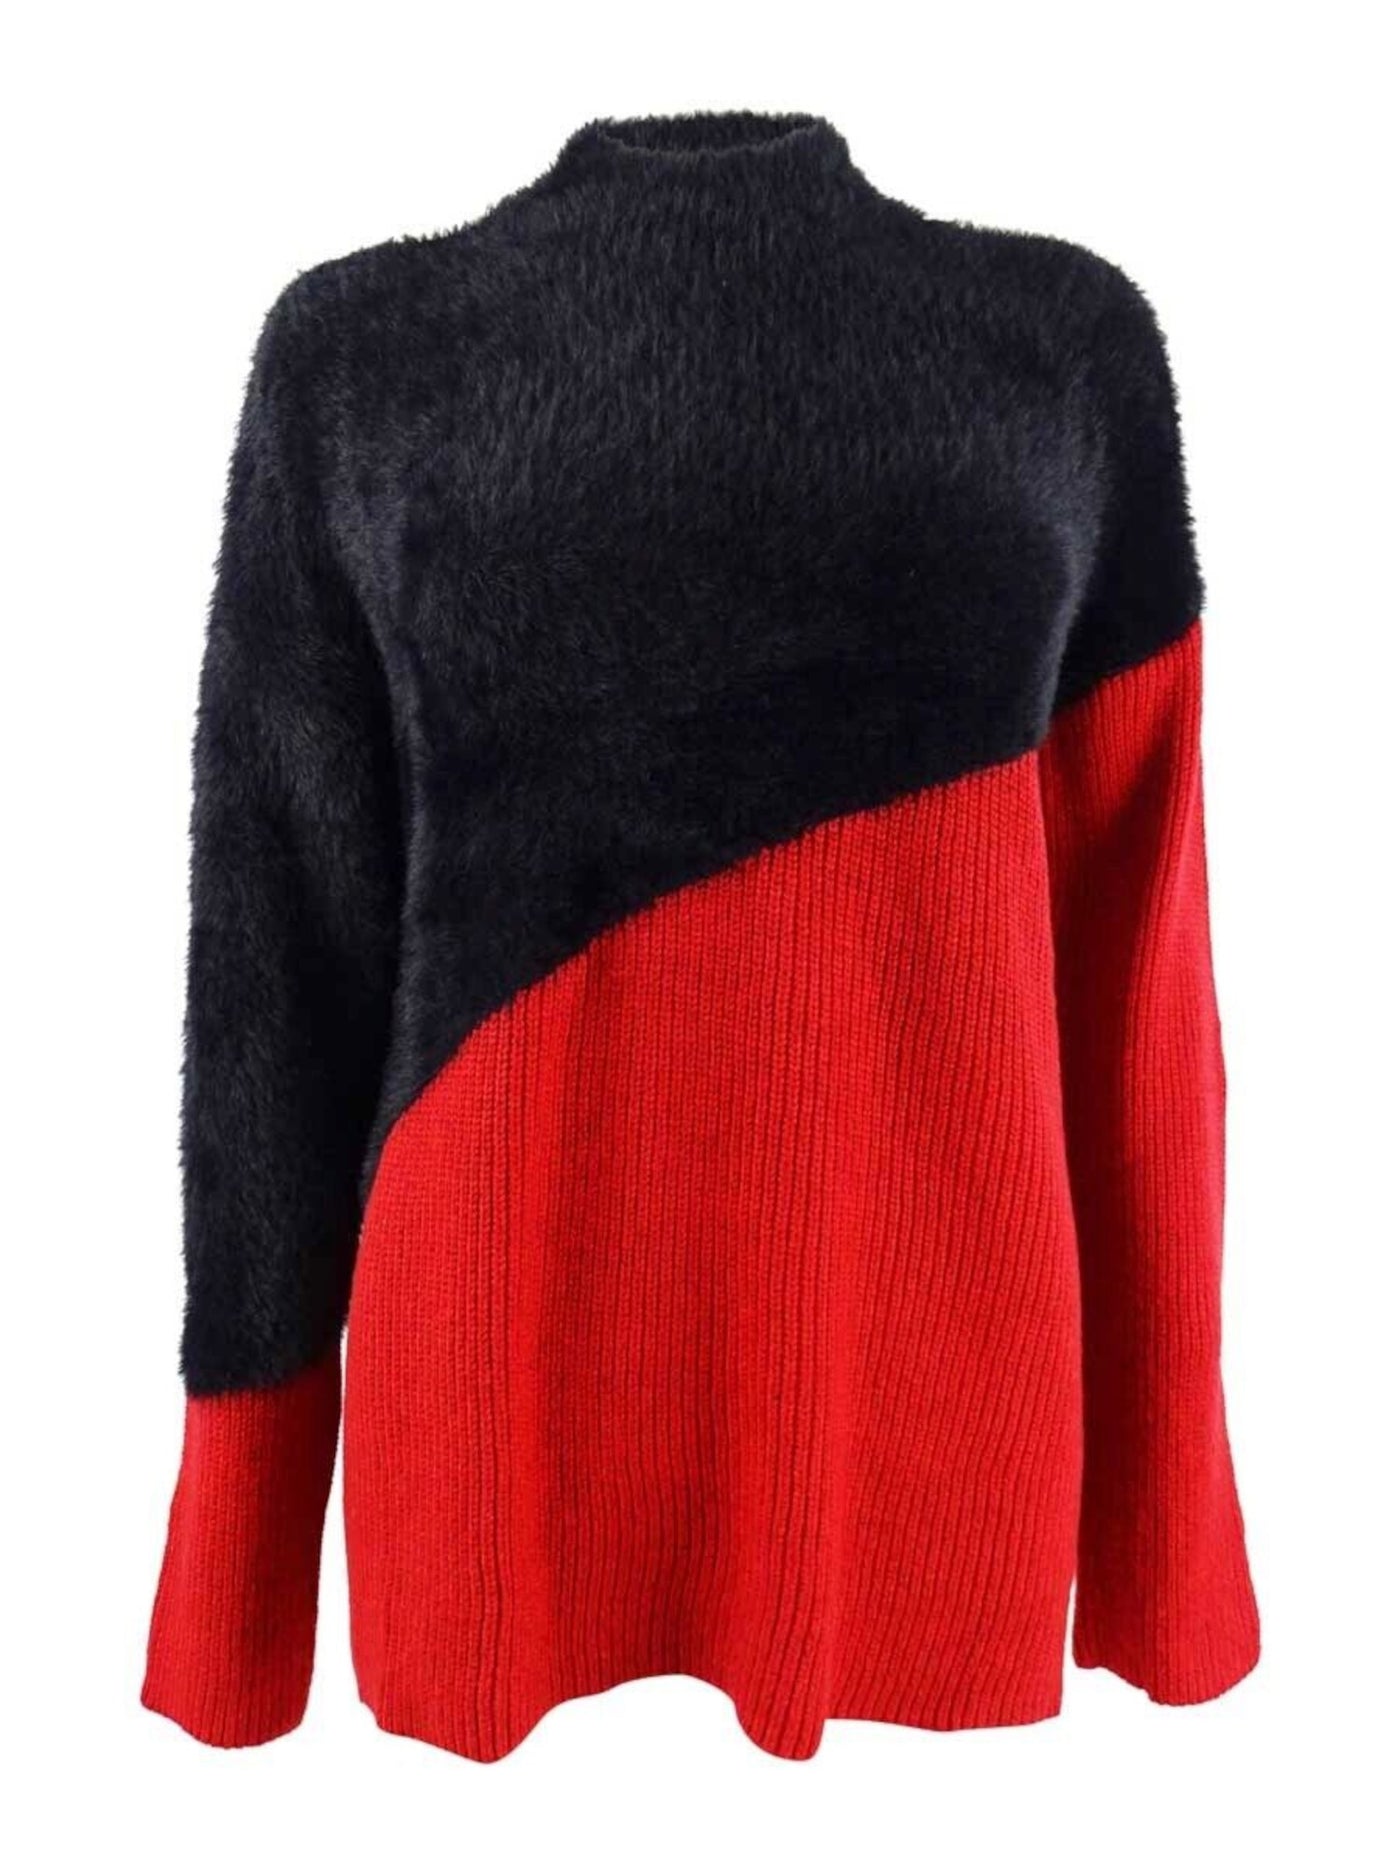 VINCE CAMUTO Womens Red Textured Ribbed Long Sleeve Mock Neck Wear To Work Sweater M